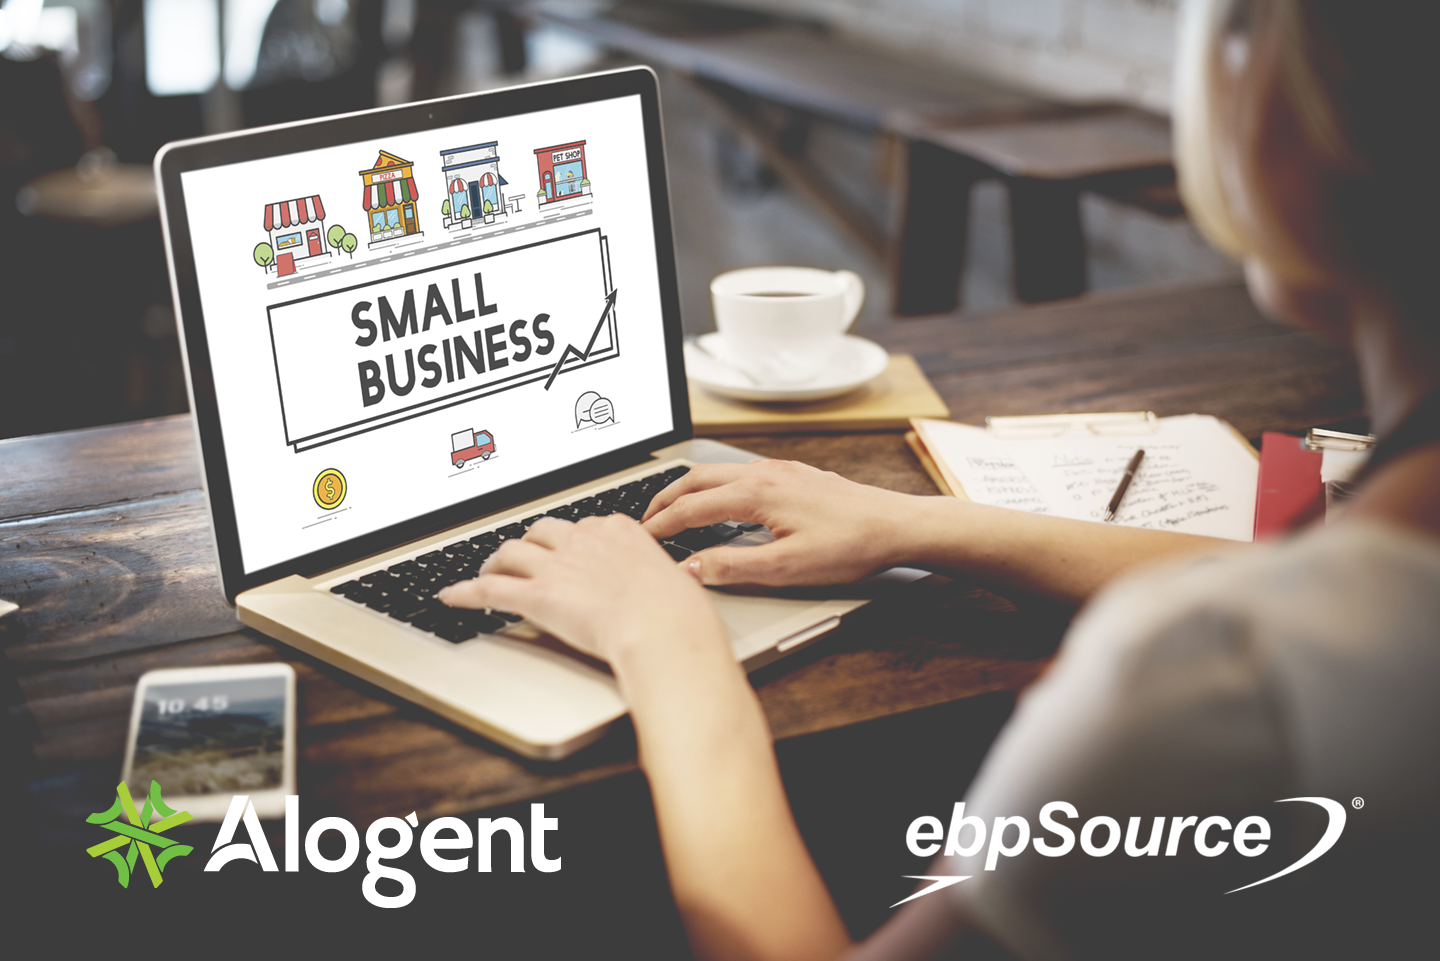 Alogent and ebpSource